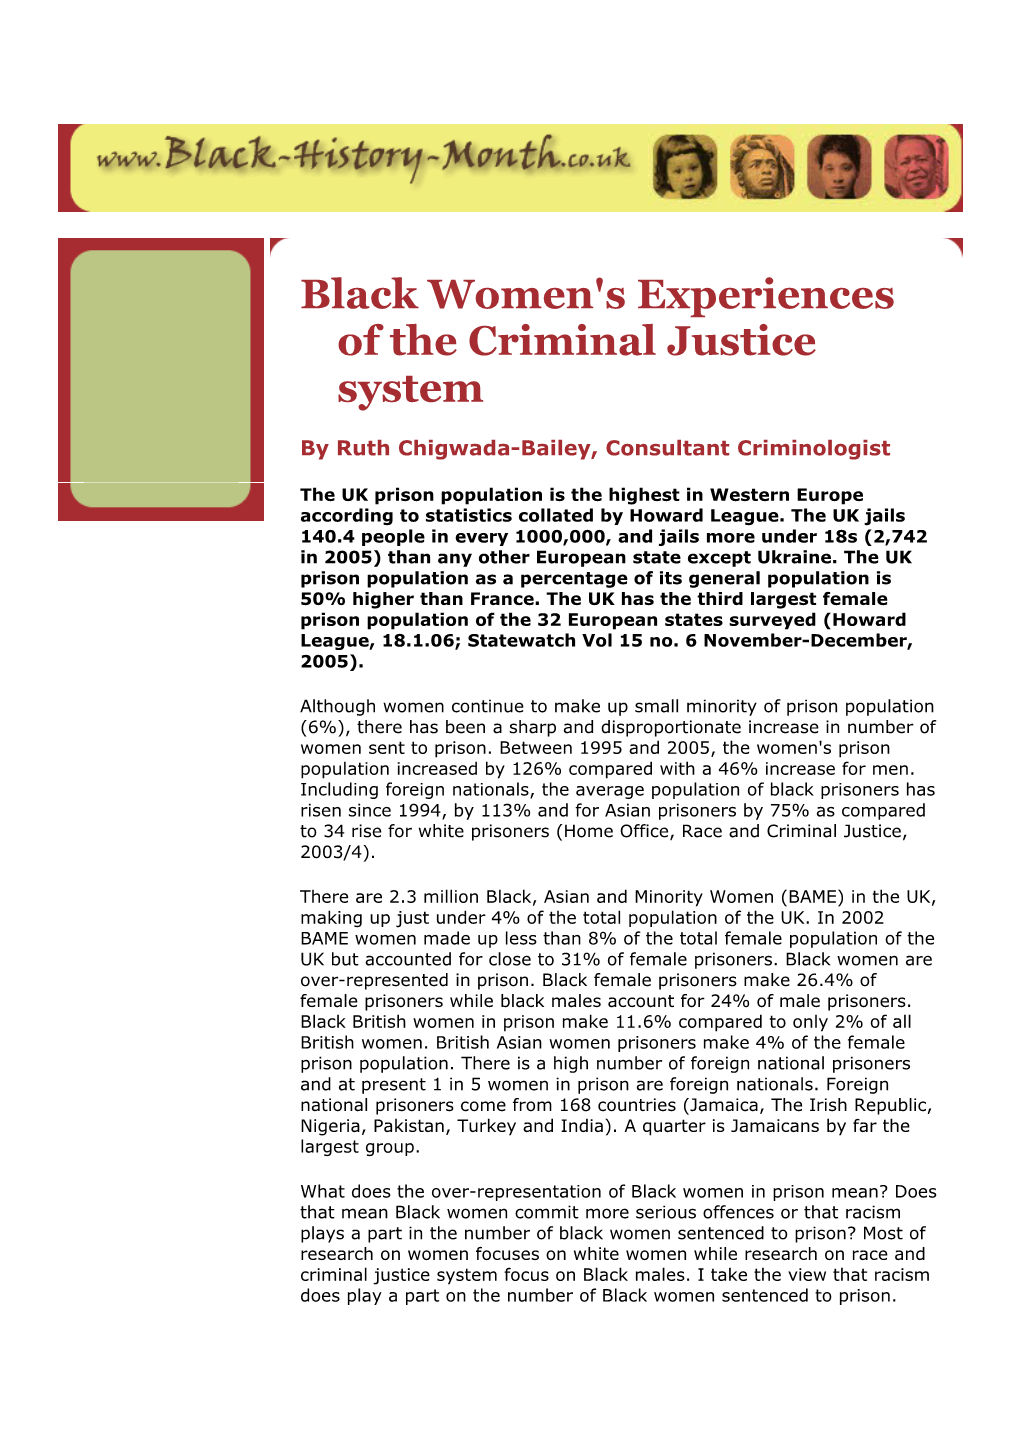 Black Women's Experiences of the Criminal Justice System